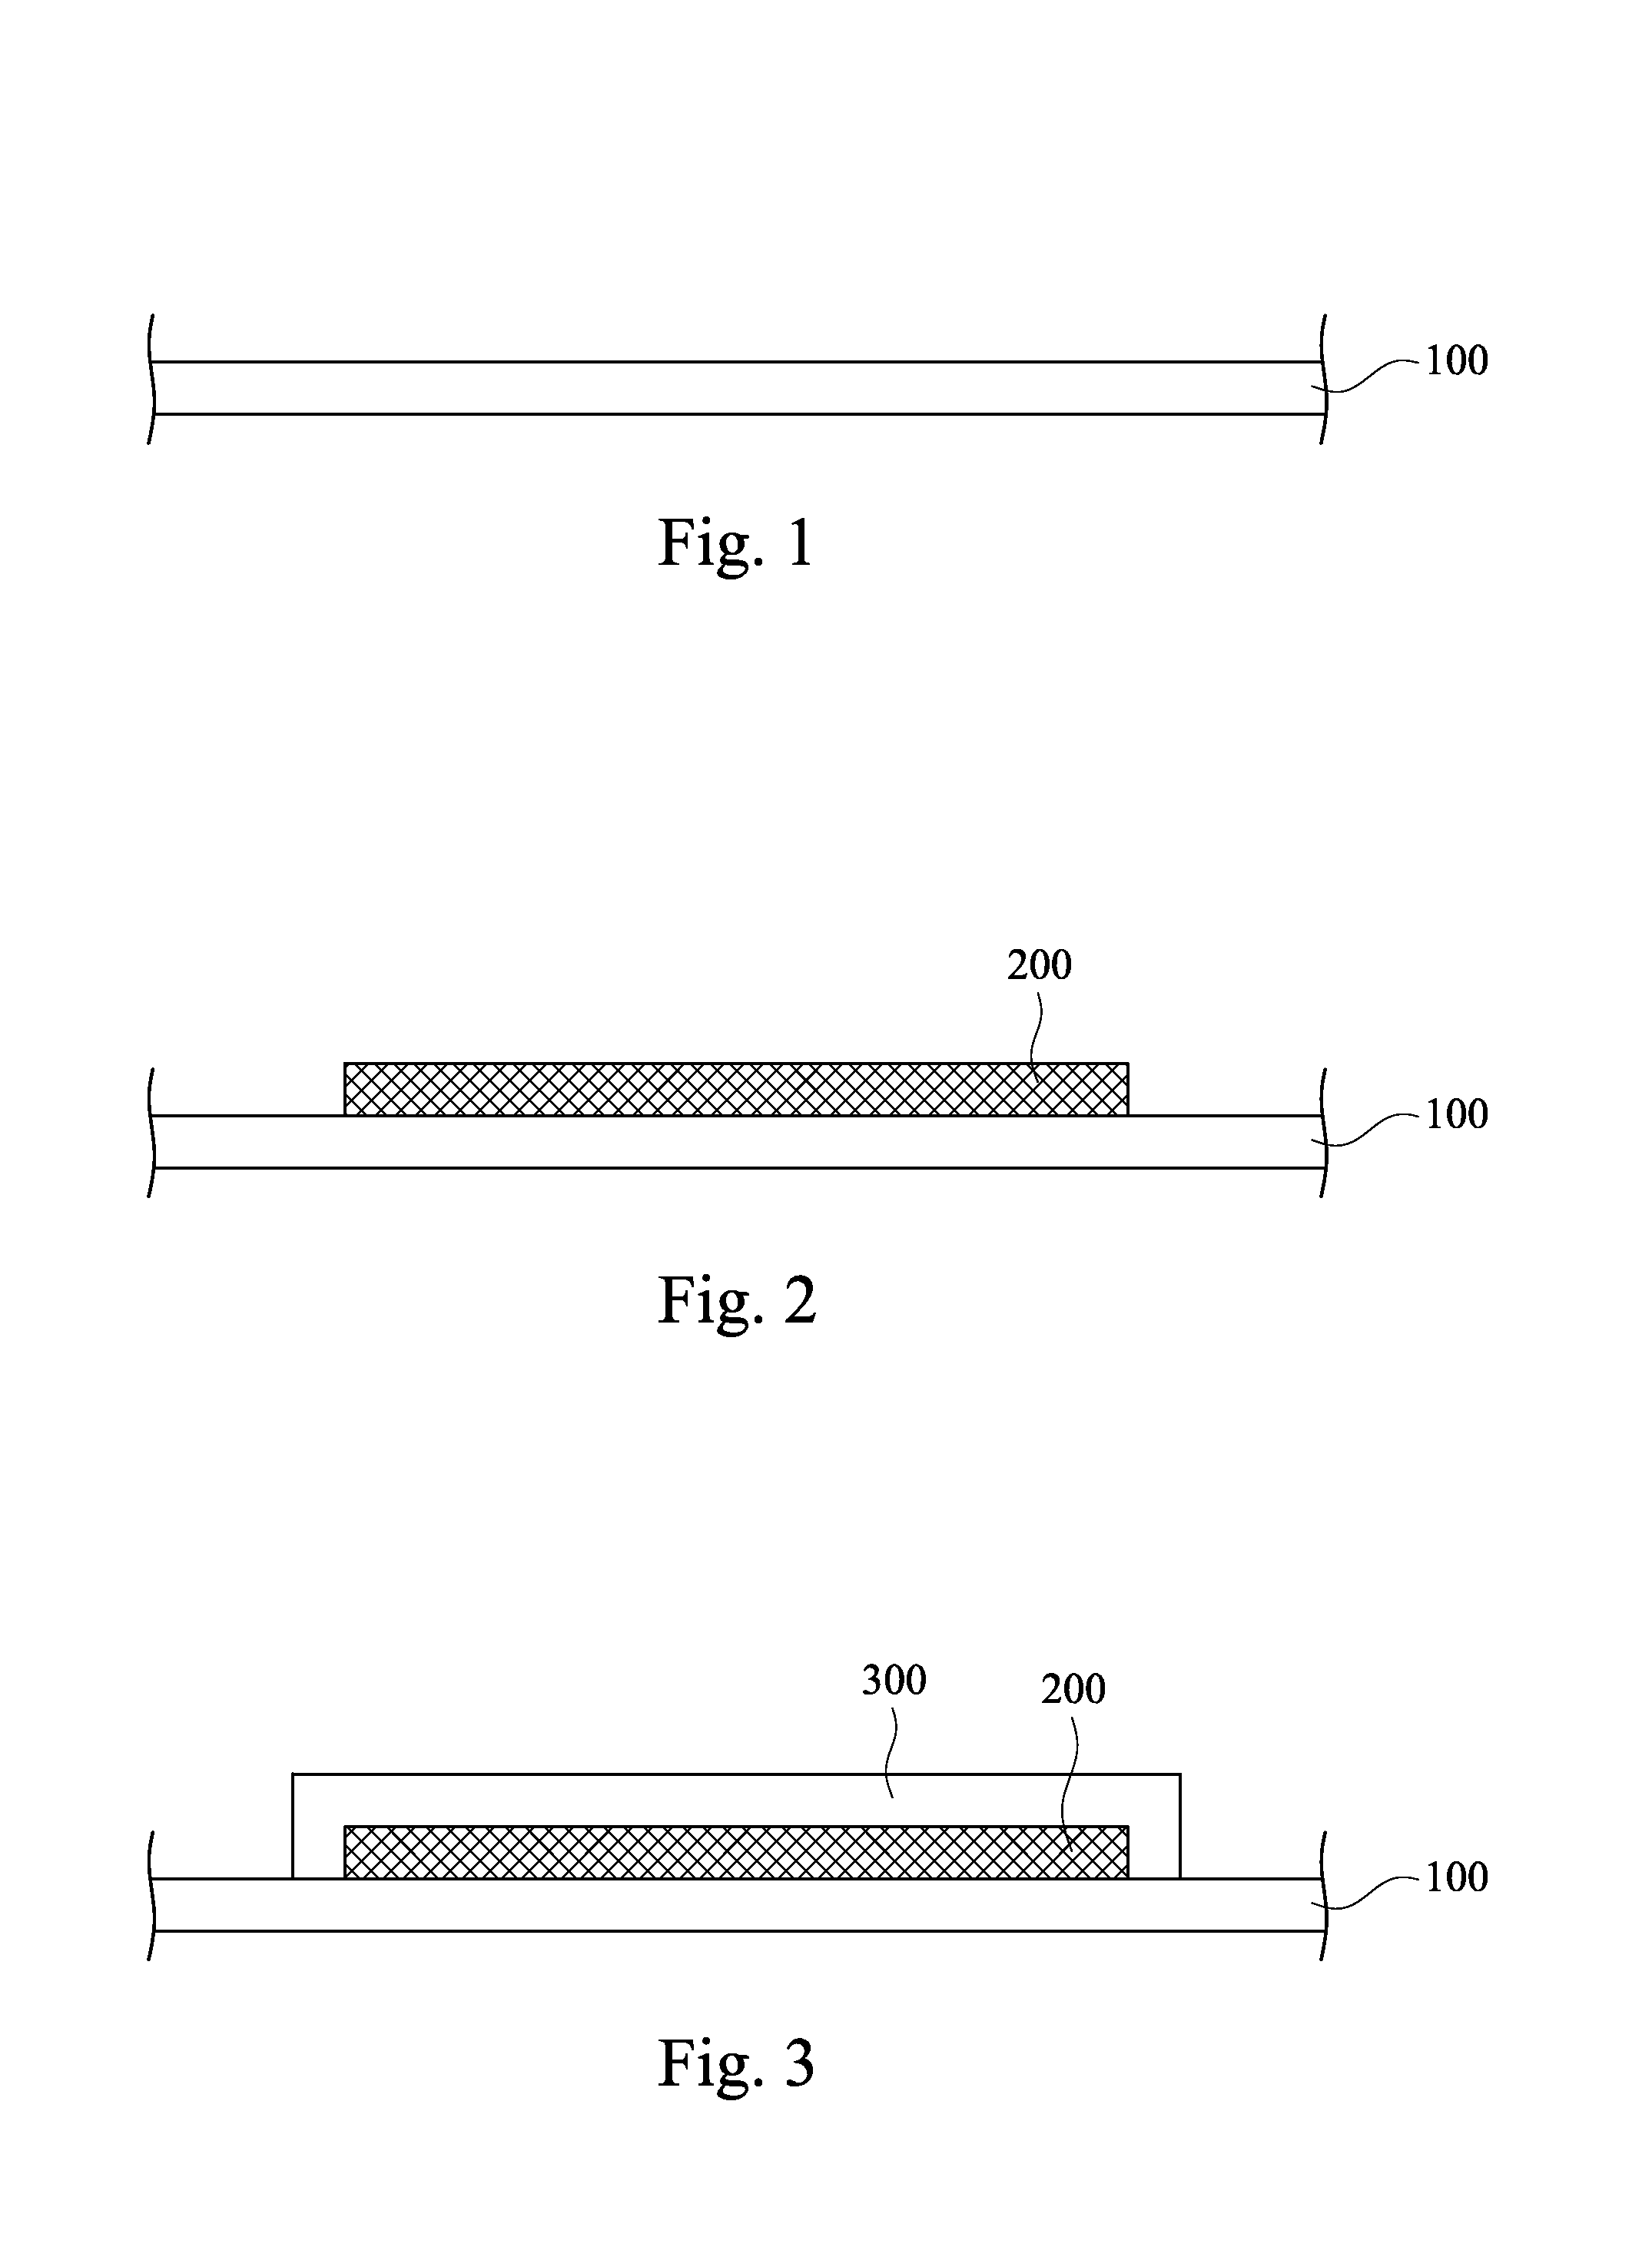 Manufacturing method of an active device substrate